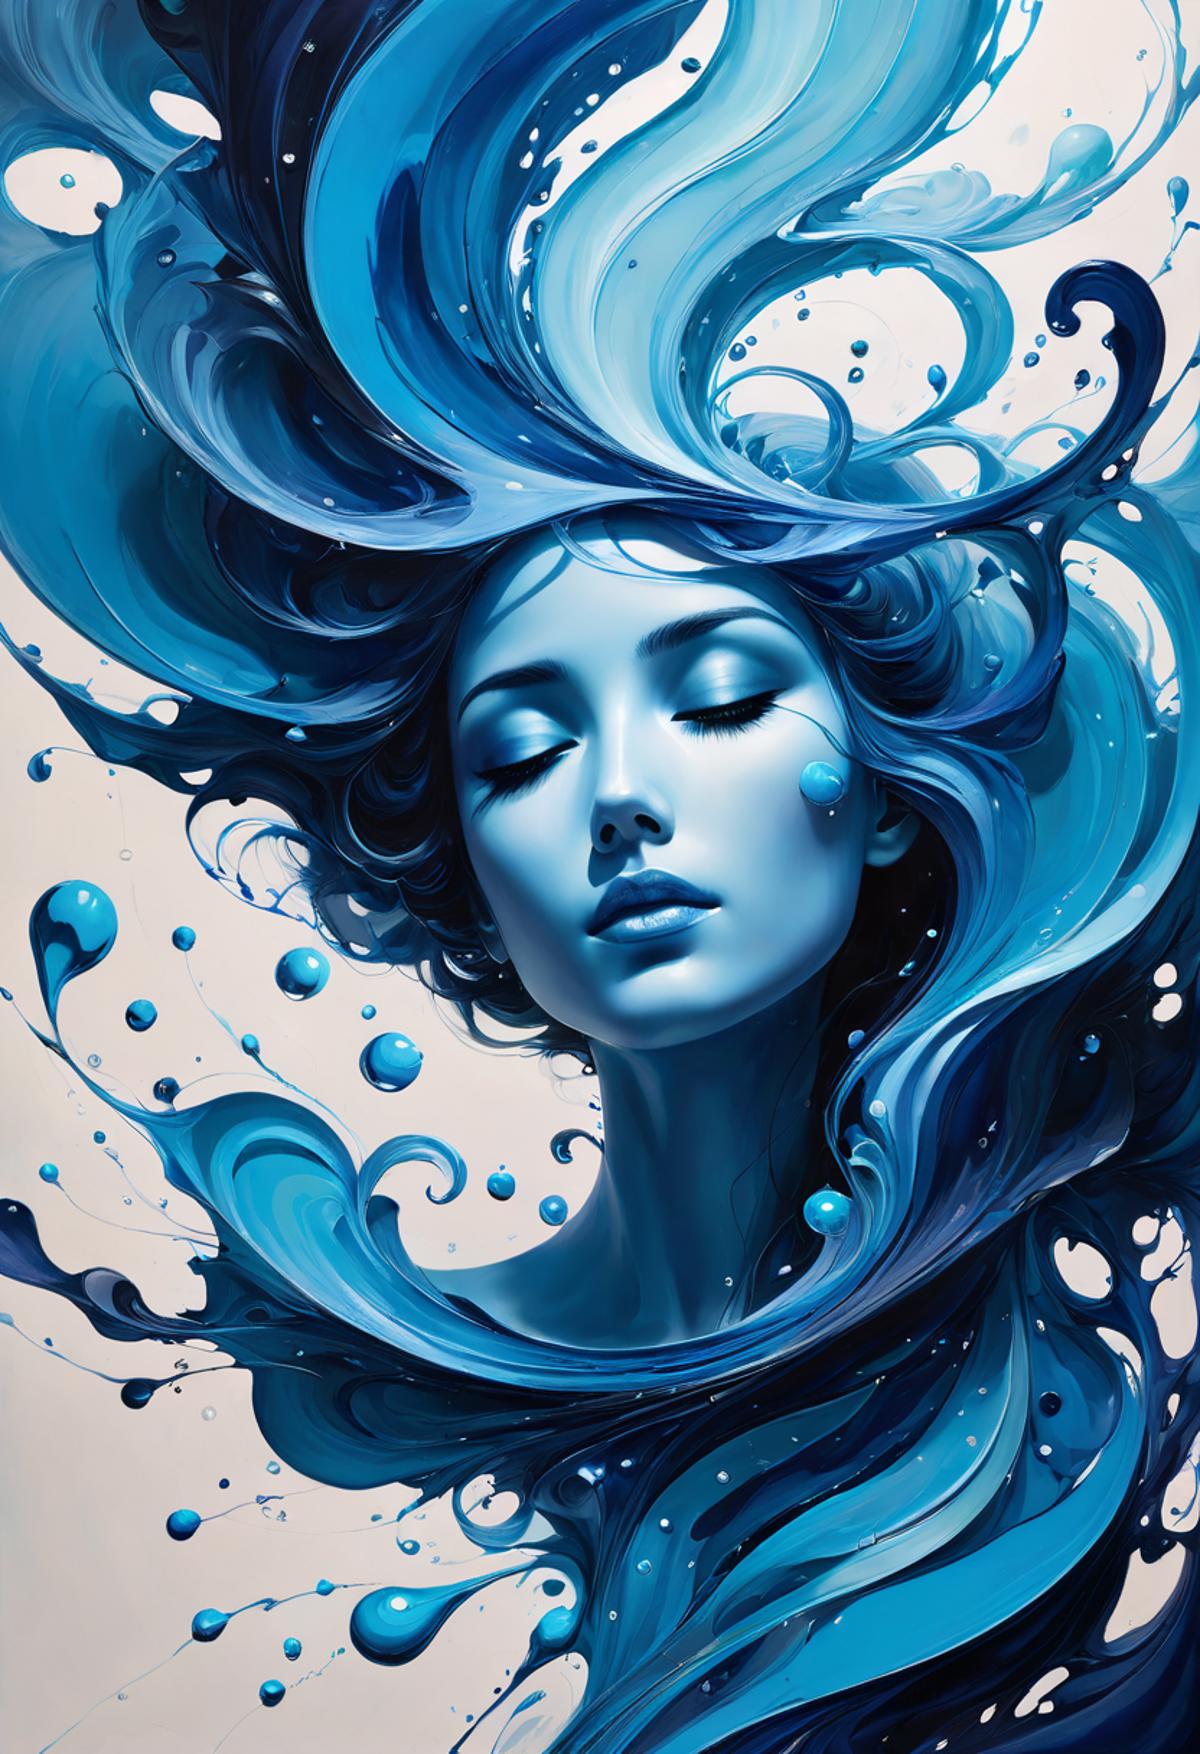 A woman in a blue dress with blue hair, surrounded by blue water and blue droplets.